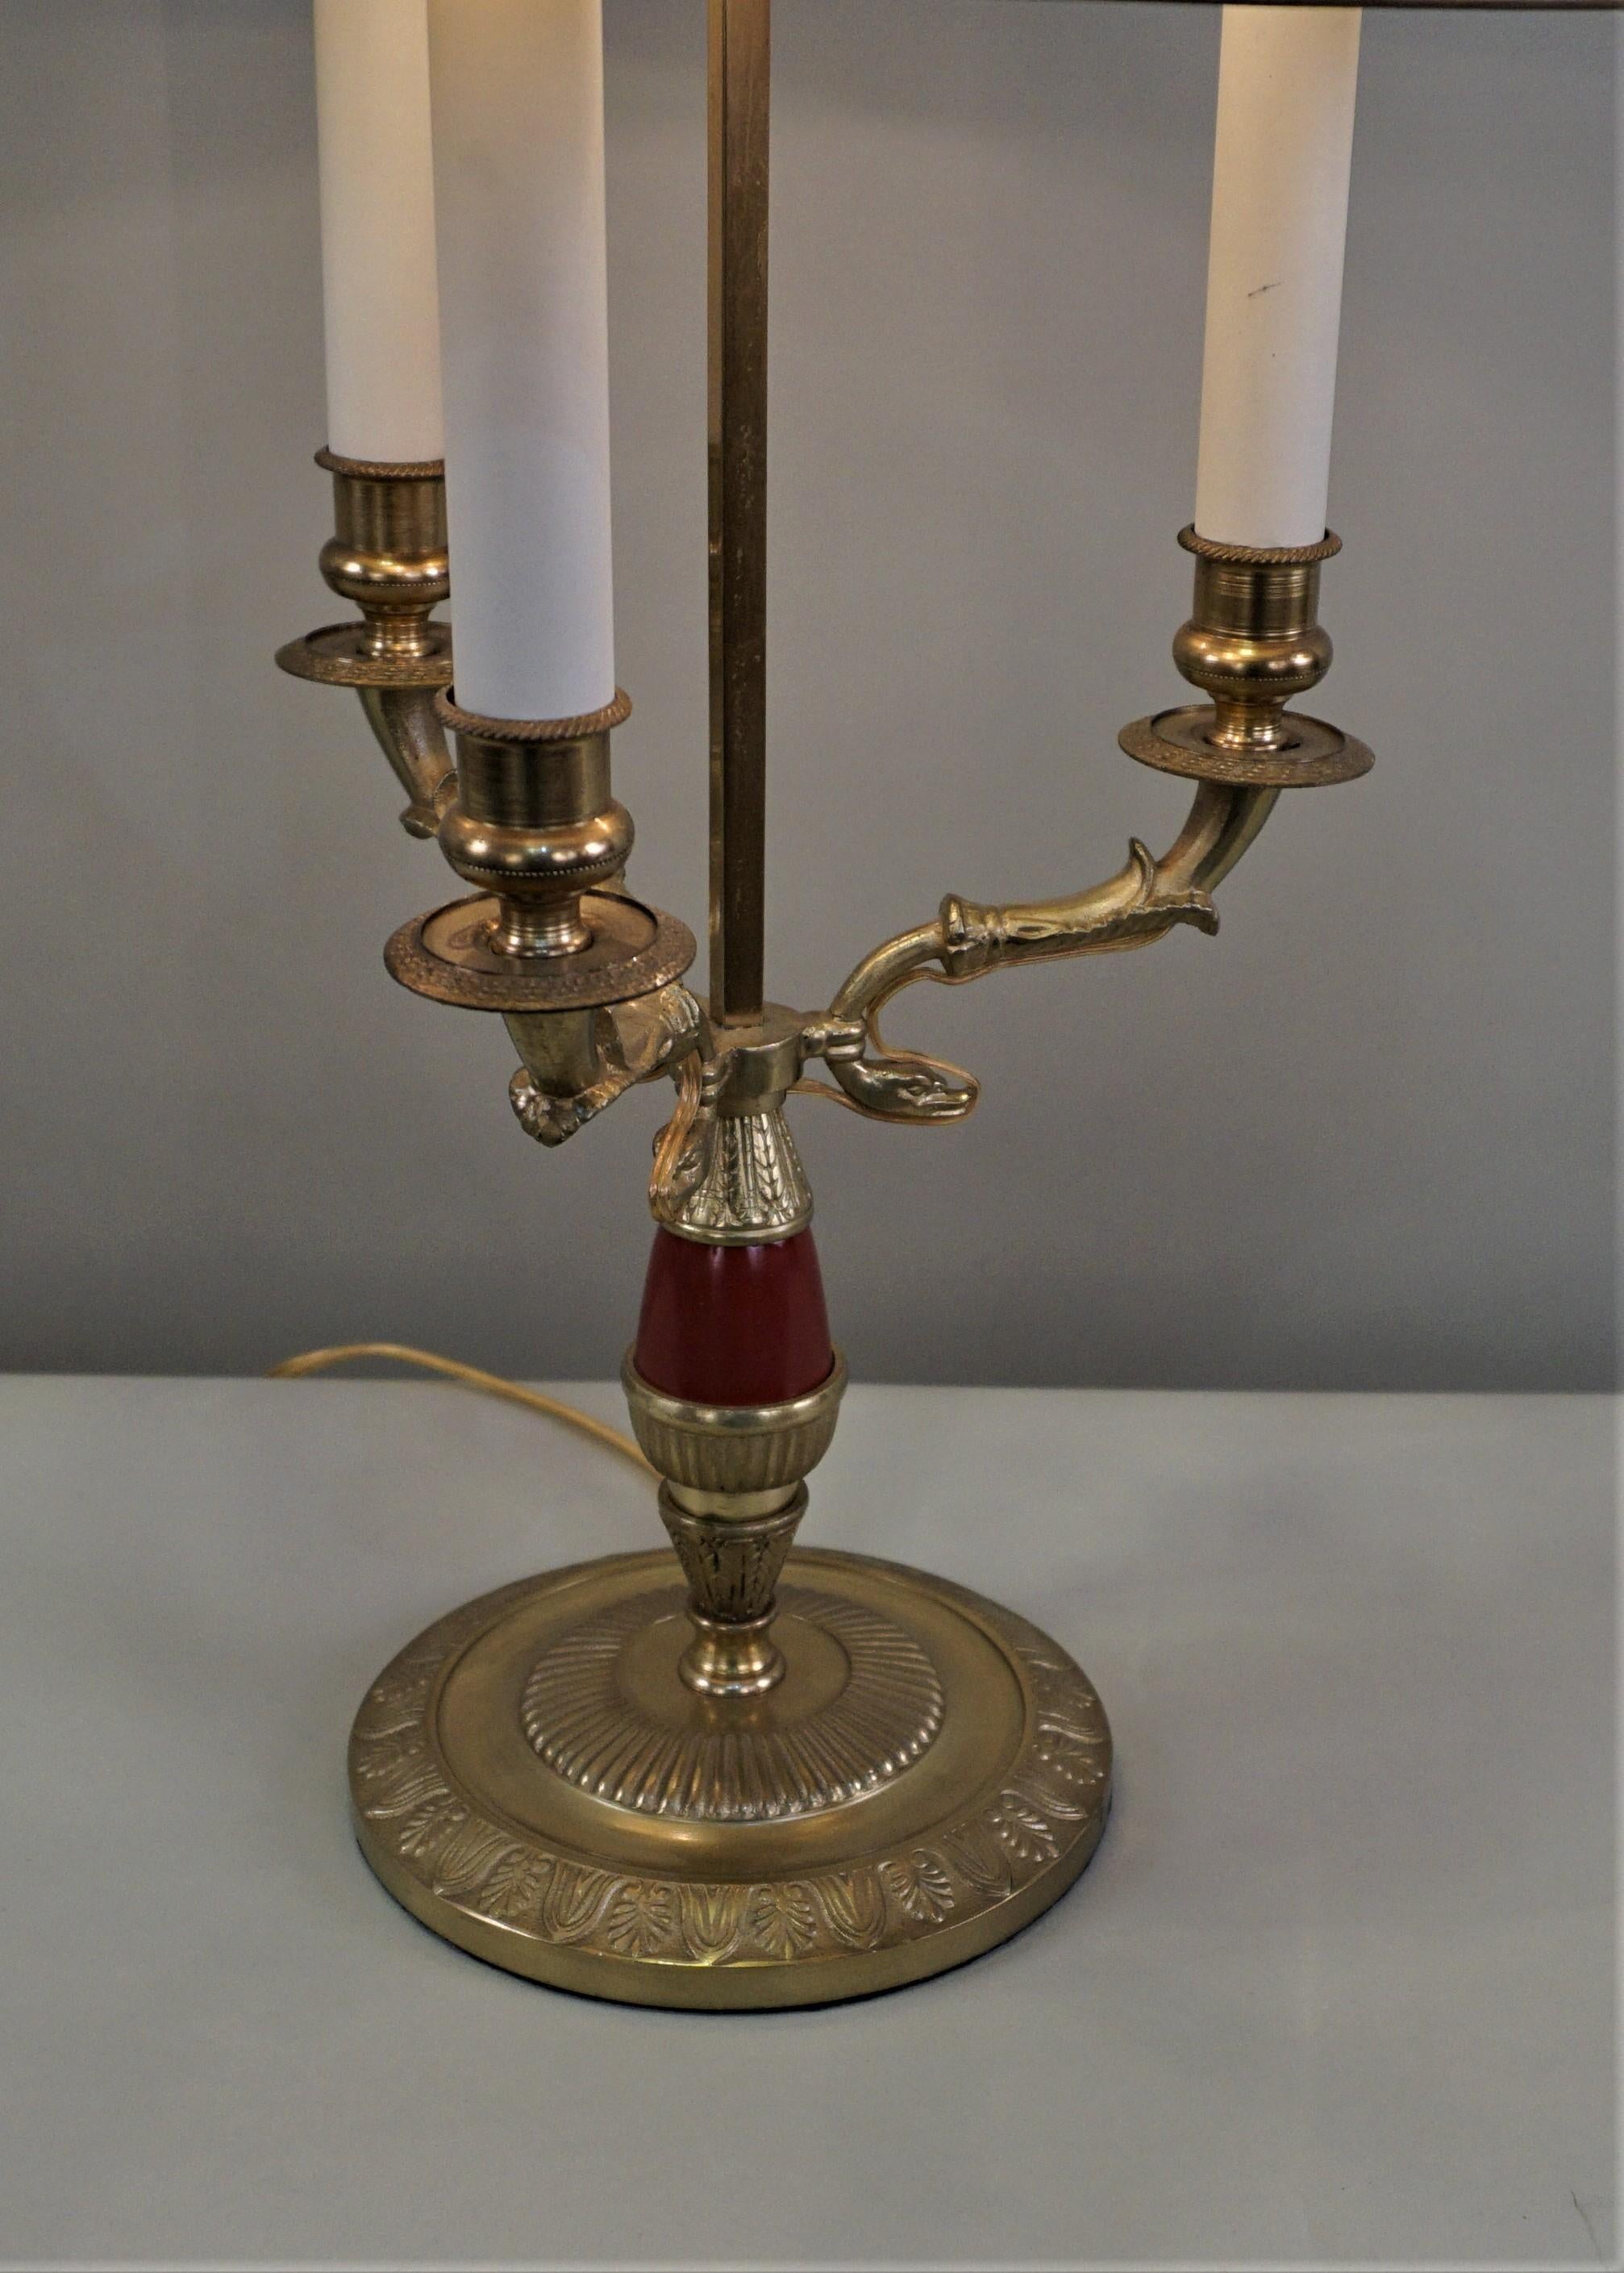 French 1930s Empire style bronze desk or table lamp with adjustable red metal shade.